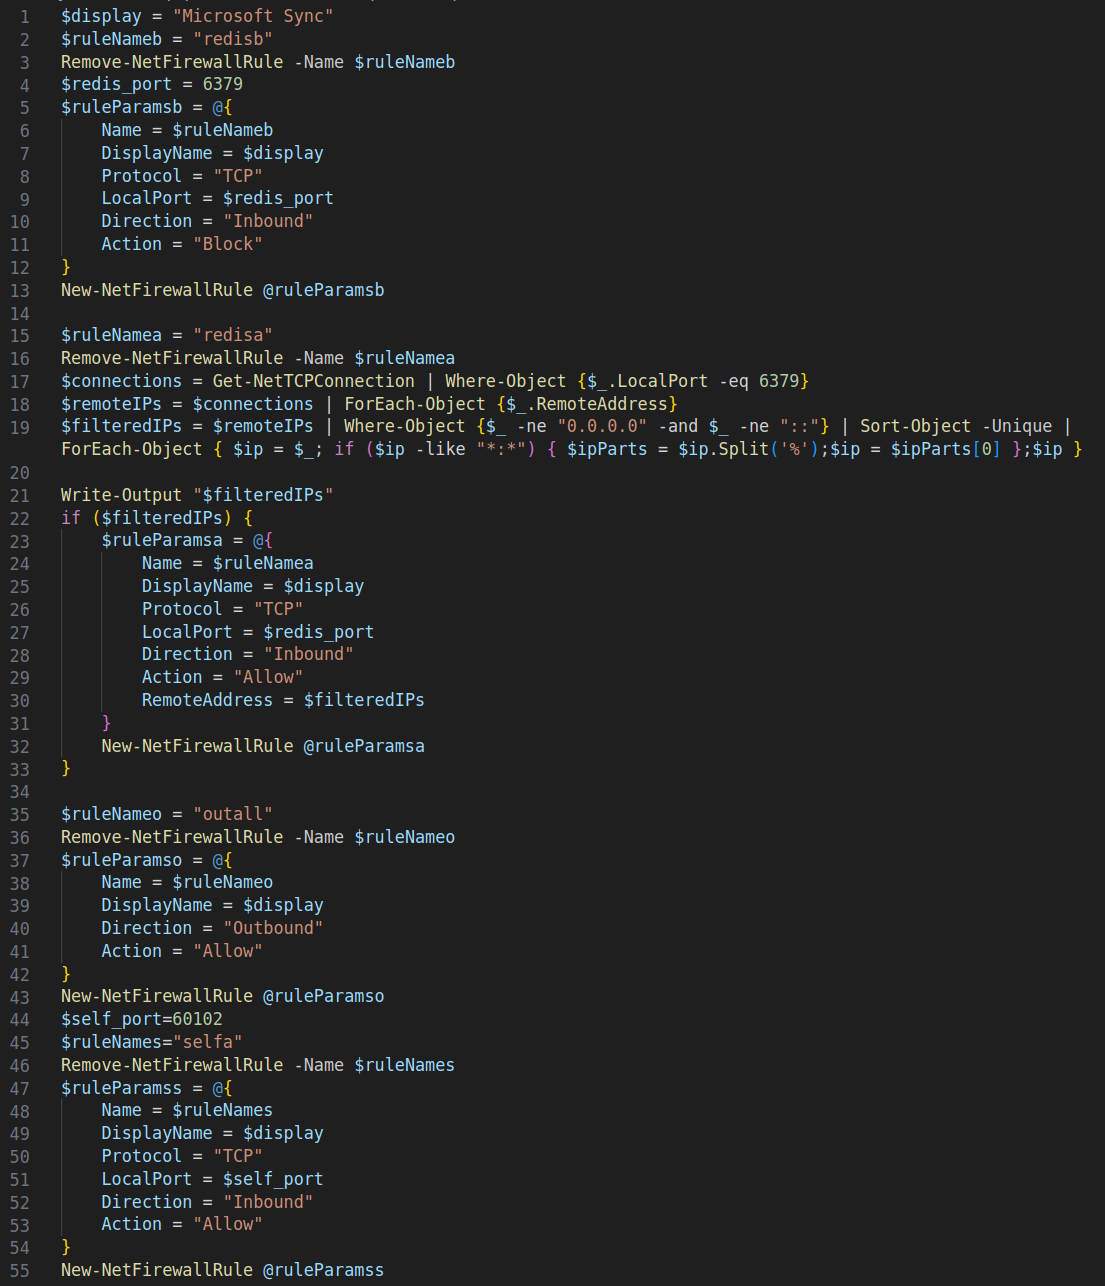 Image 11 is a screenshot of many lines of code. Line five is where the PowerShell command configures the local system firewall to block legitimate access. Line 11 is where the script opens a communication port.